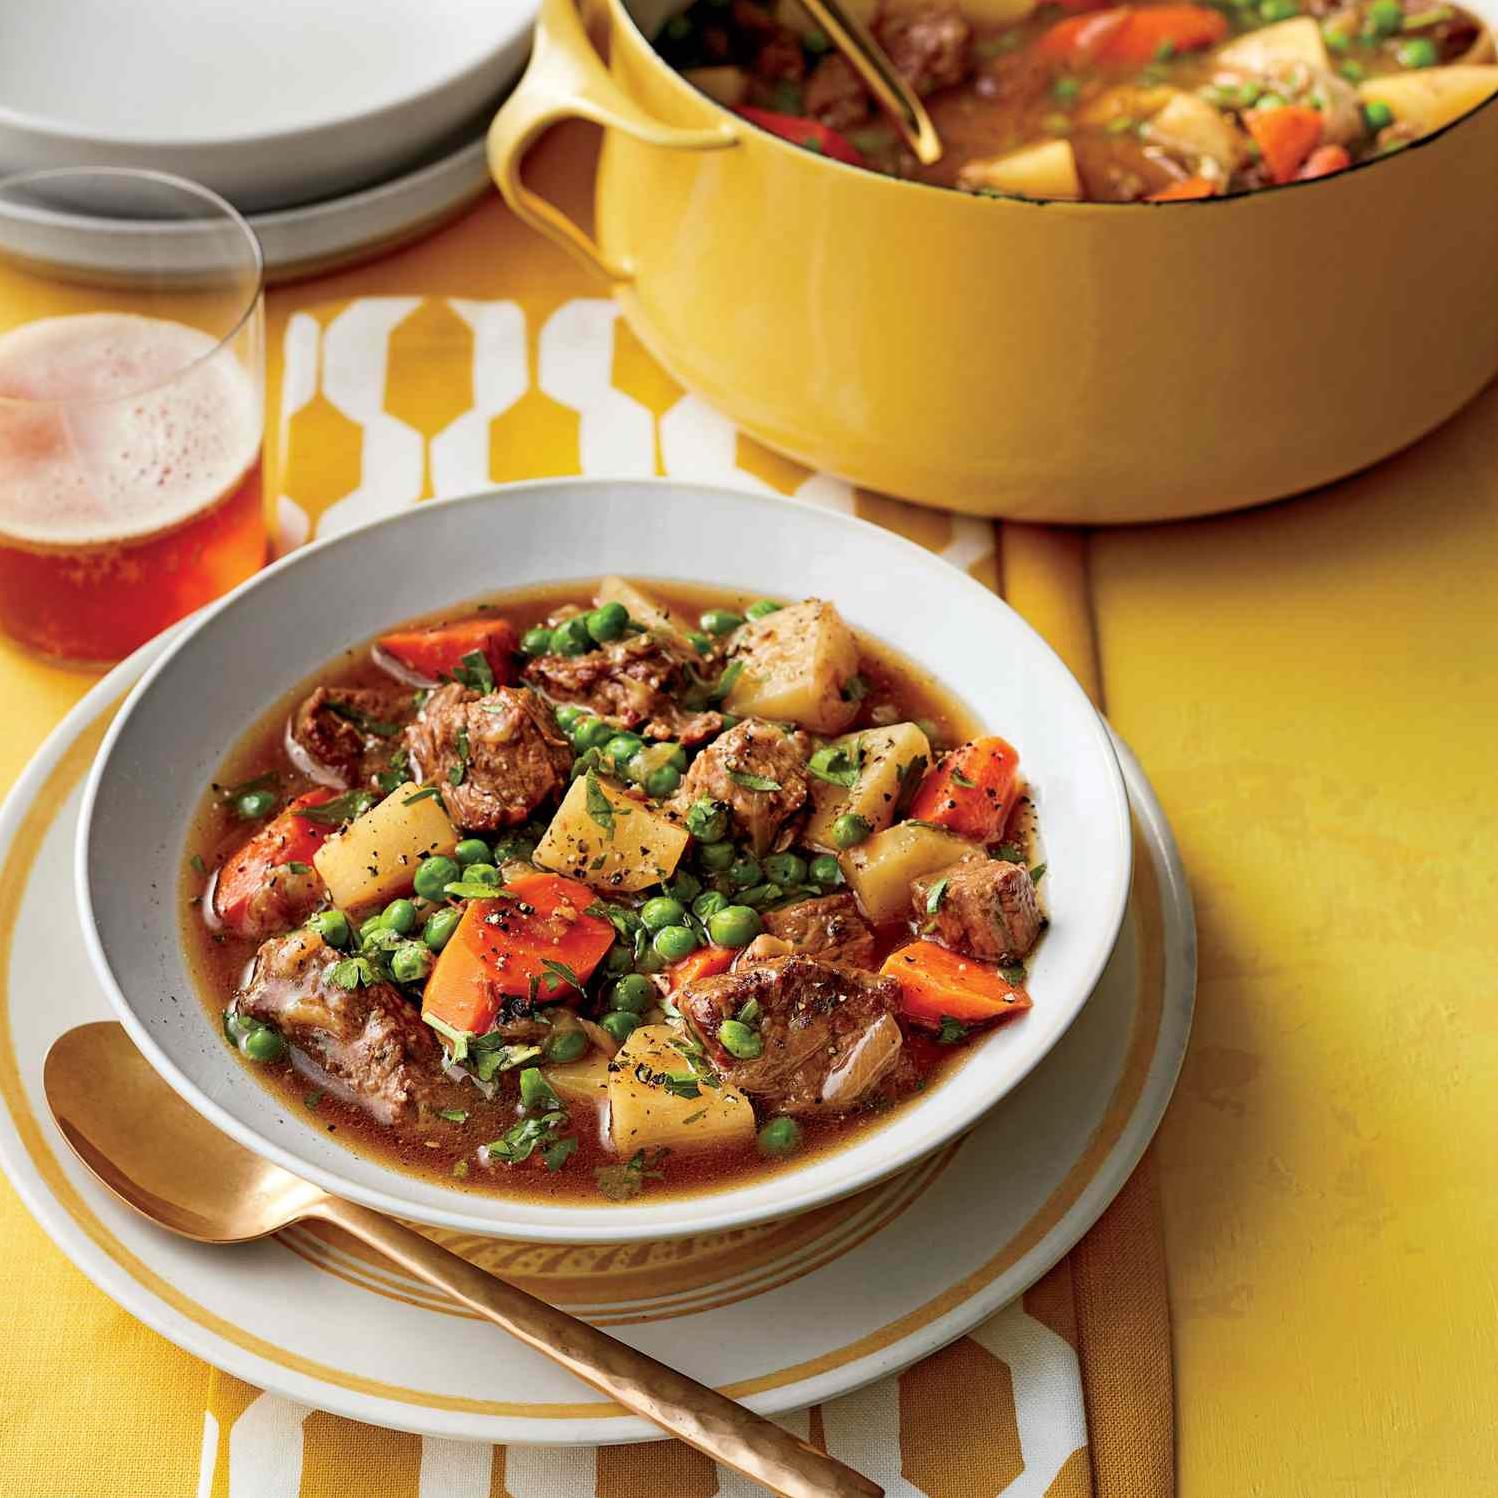  Top the stew with a sprinkle of fresh parsley for a pop of color and flavor.